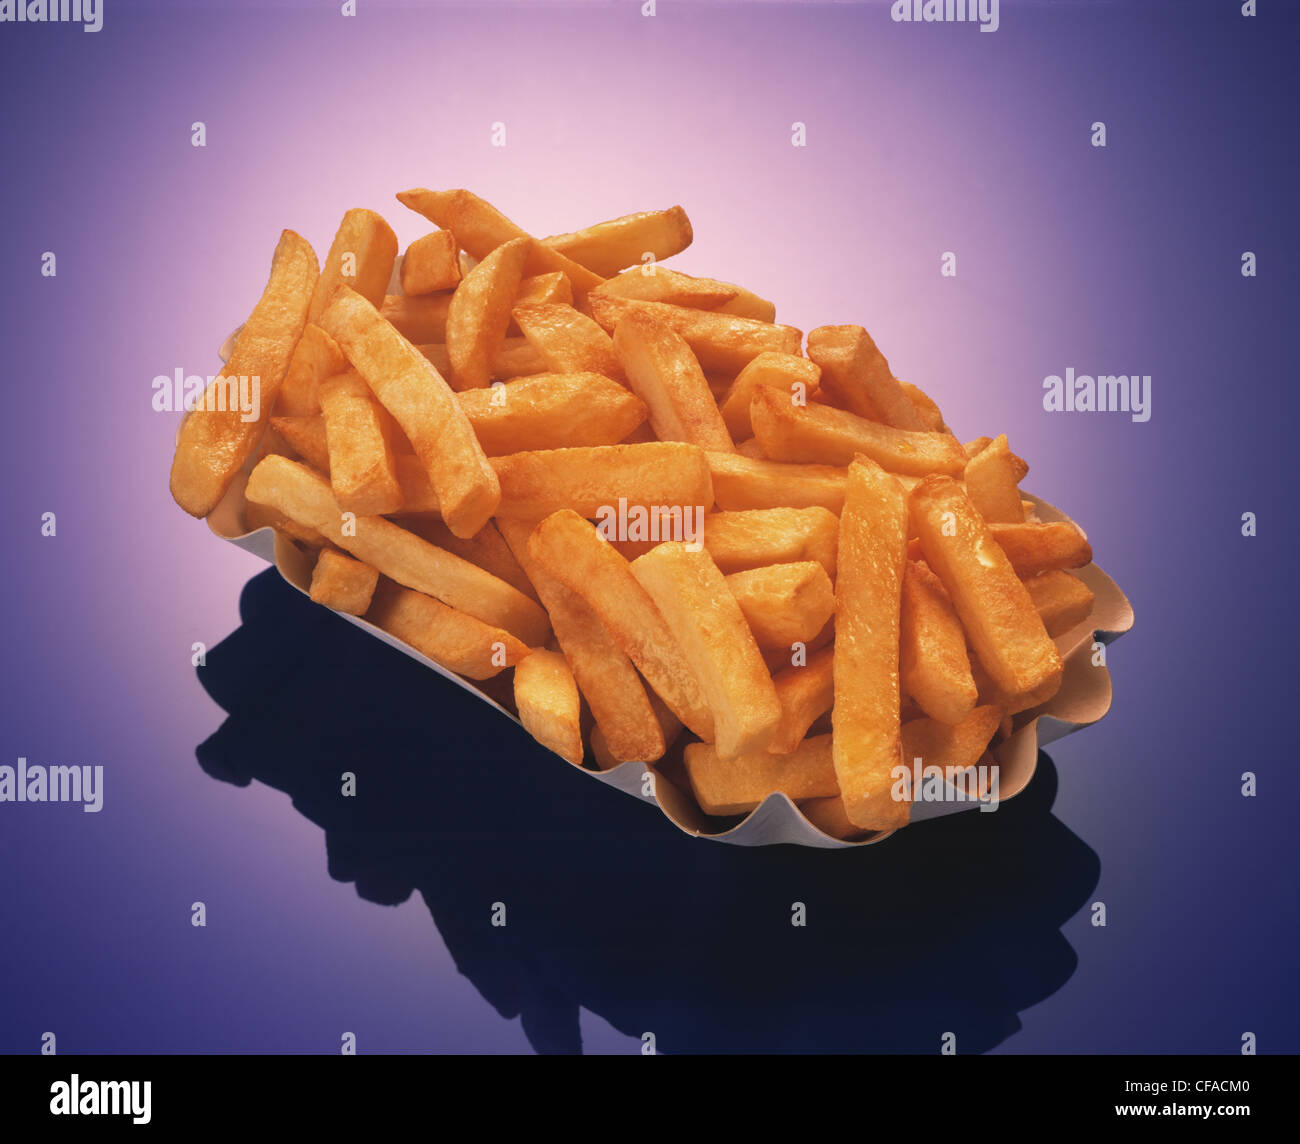 Cut out: french fries Stock Photo